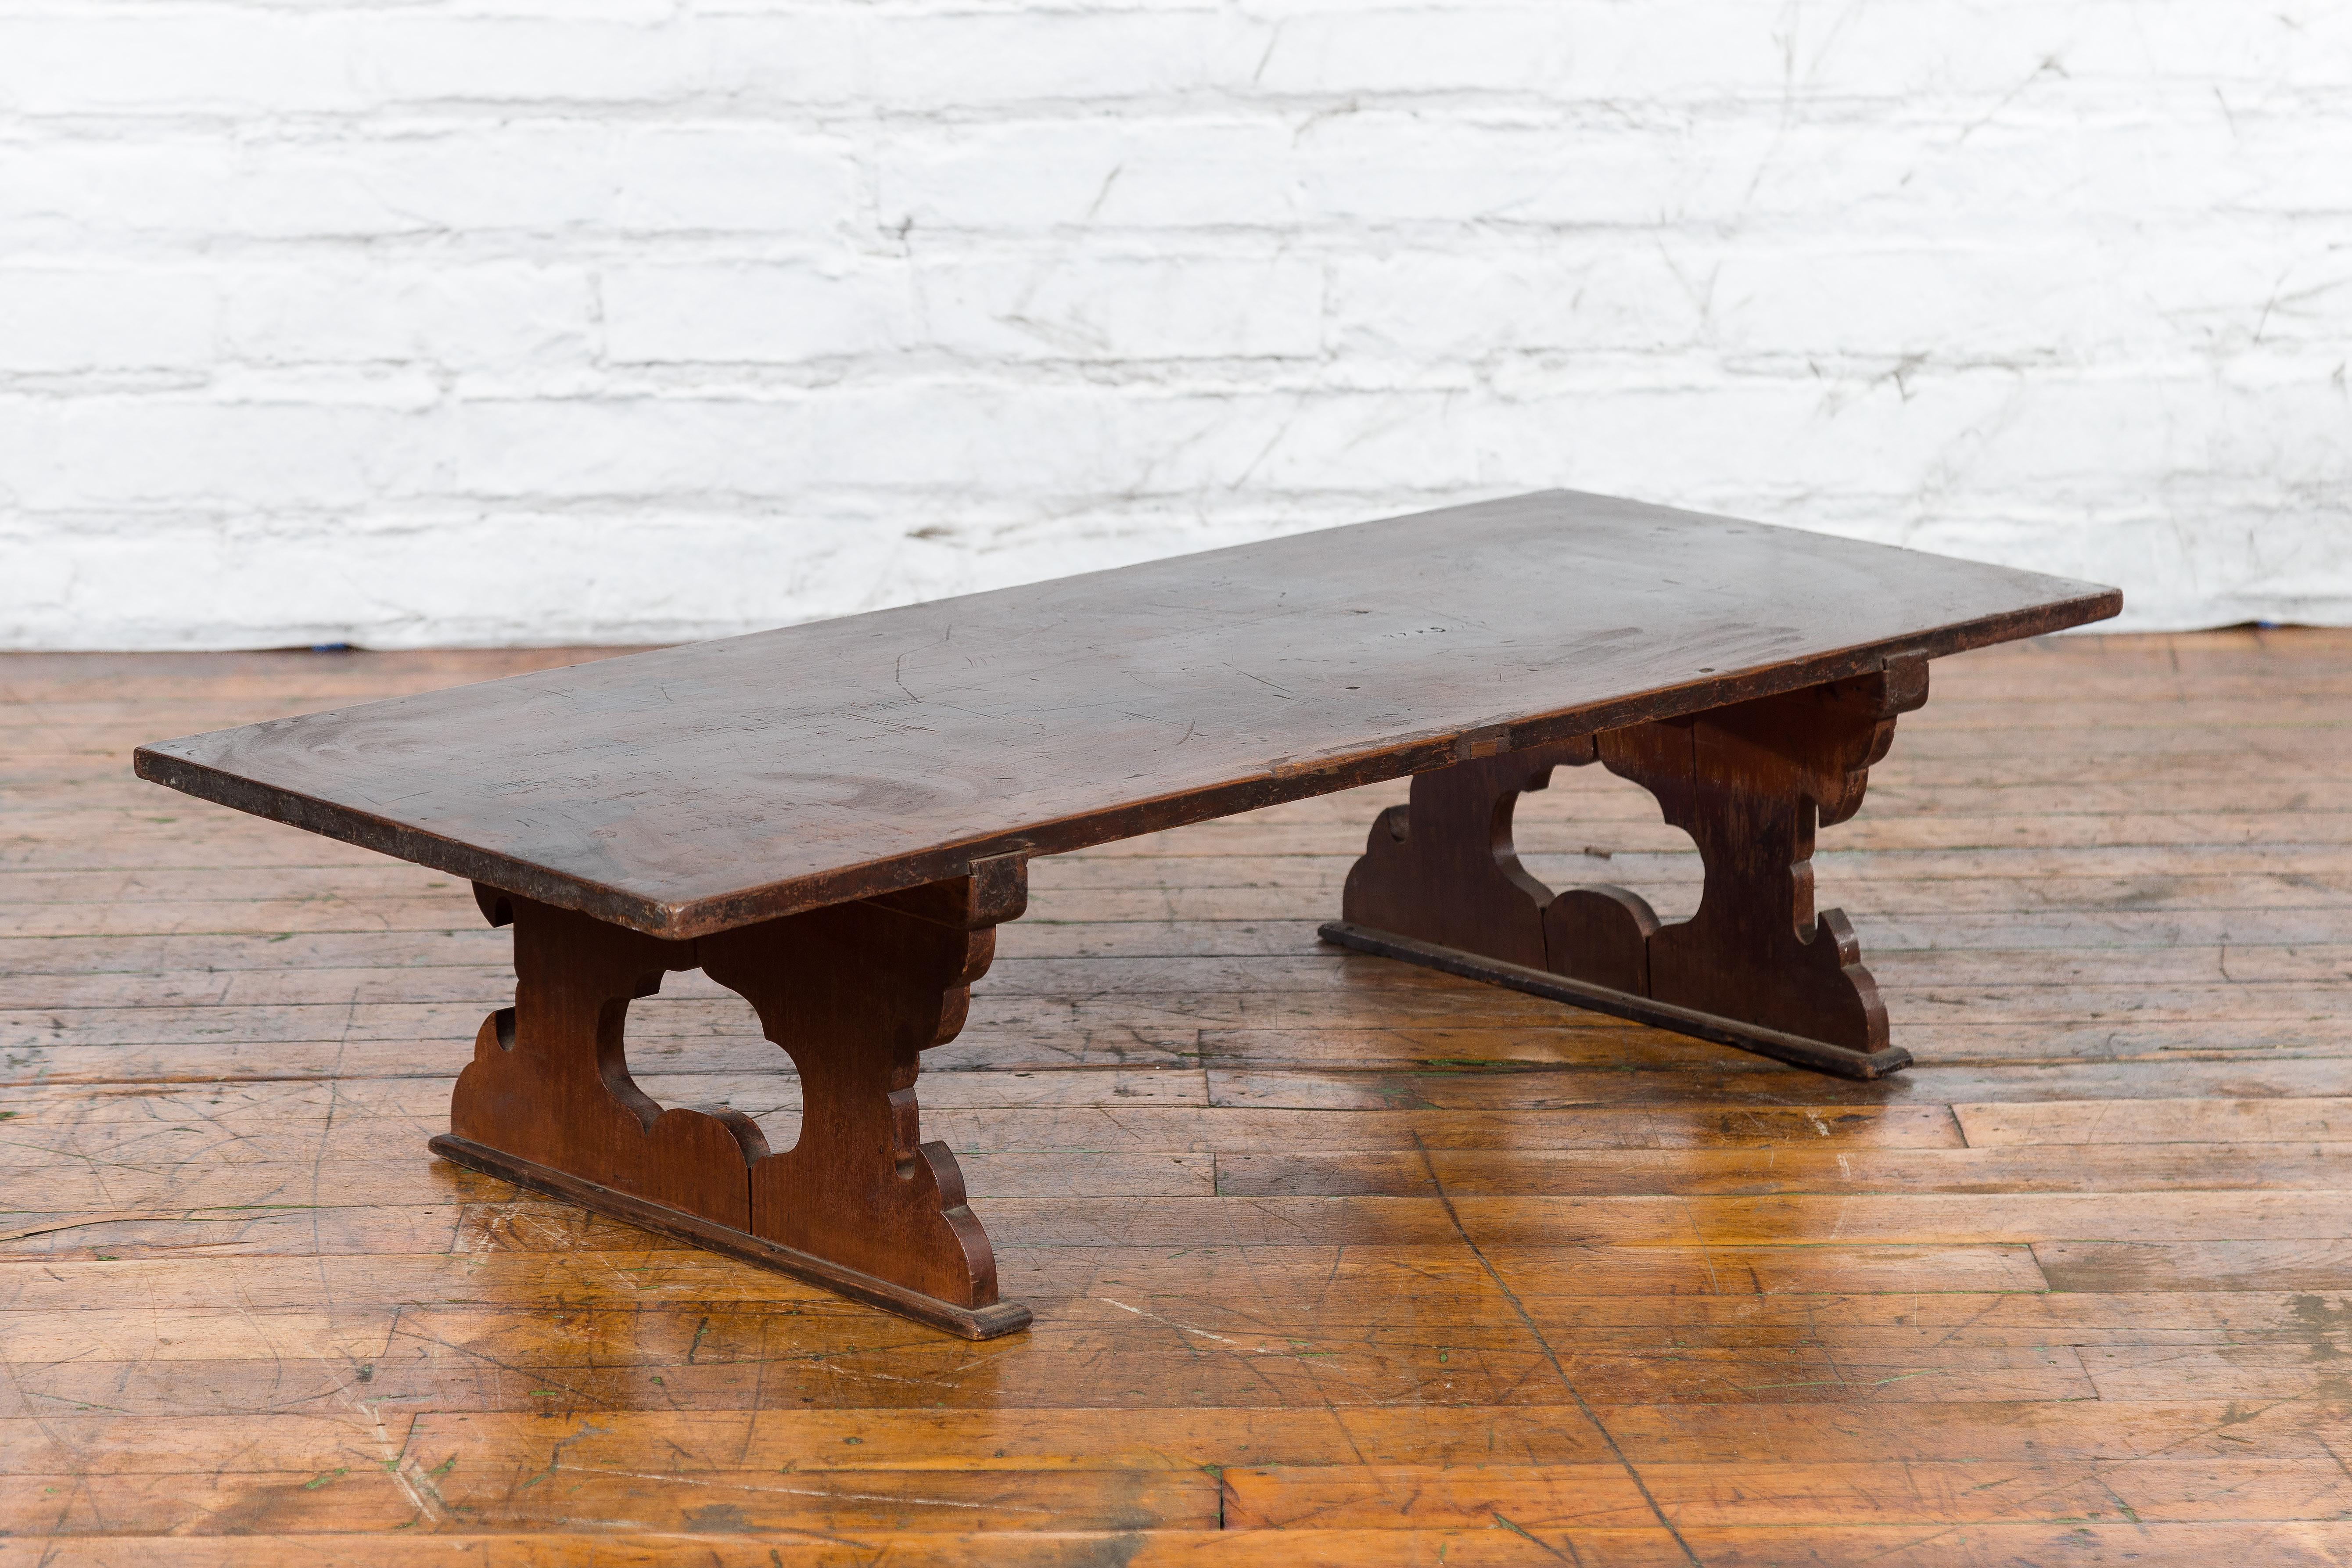 A Japanese Meiji period low table from the early 20th century, with recessed legs and open carved cutout design. Created in Japan during the Meiji era where is was used as a low writing table, this piece features a rectangular top overhanging two